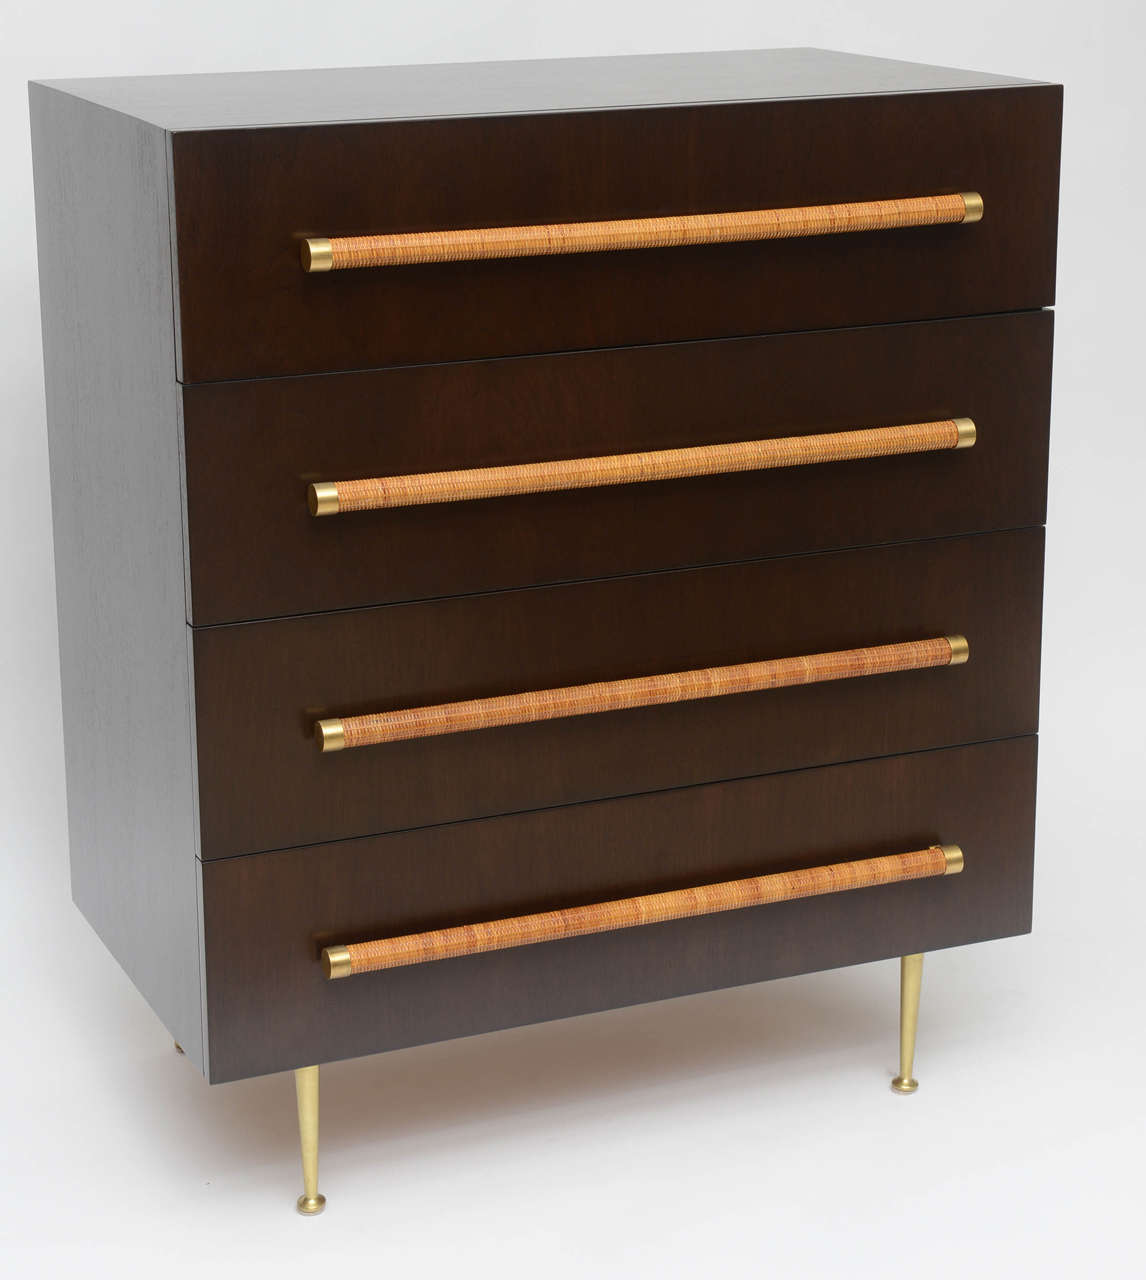 Beautifully restored four-drawer dresser by T. H. Robsjohn-Gibbings in dark, espresso-stained walnut. Brushed brass legs and end caps on rattan-wrapped drawer pulls. Remains of Widdicomb label inside top drawer. A handsome Classic piece with a